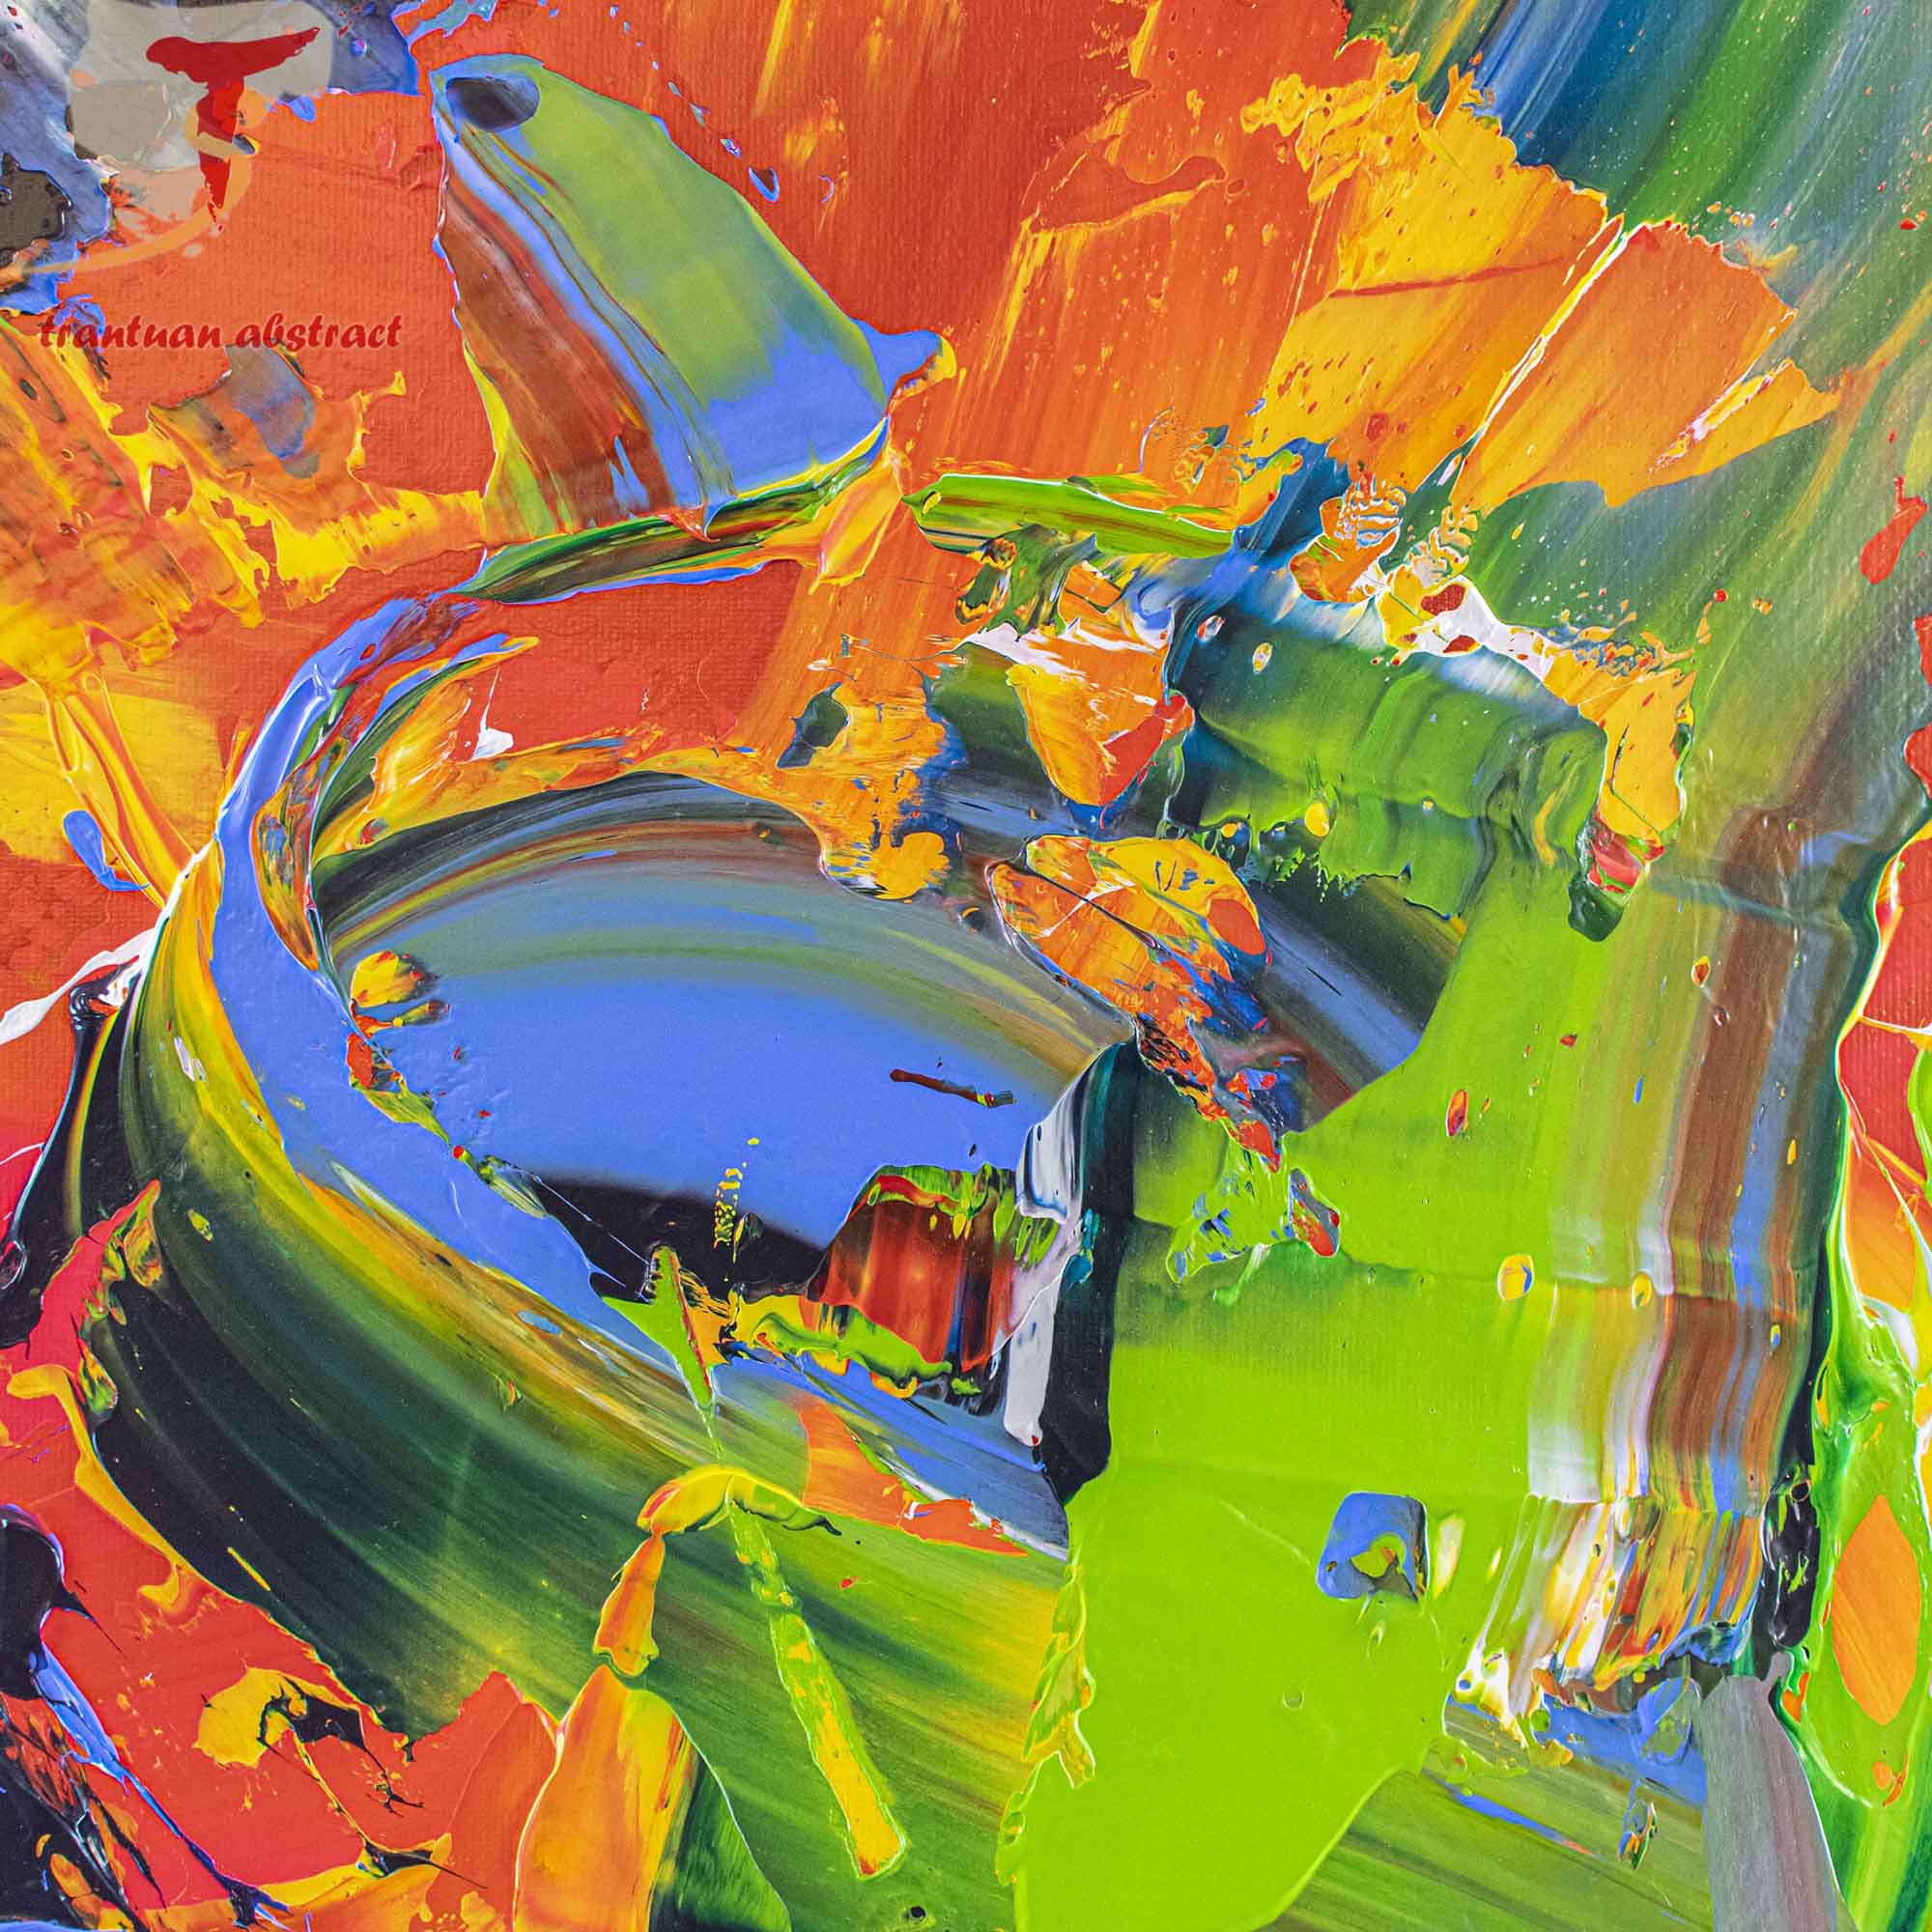 Tran Tuan Abstract Song of Summer 2021 120 x 100 x 5 cm Acrylic on Canvas Painting Detail s (1)